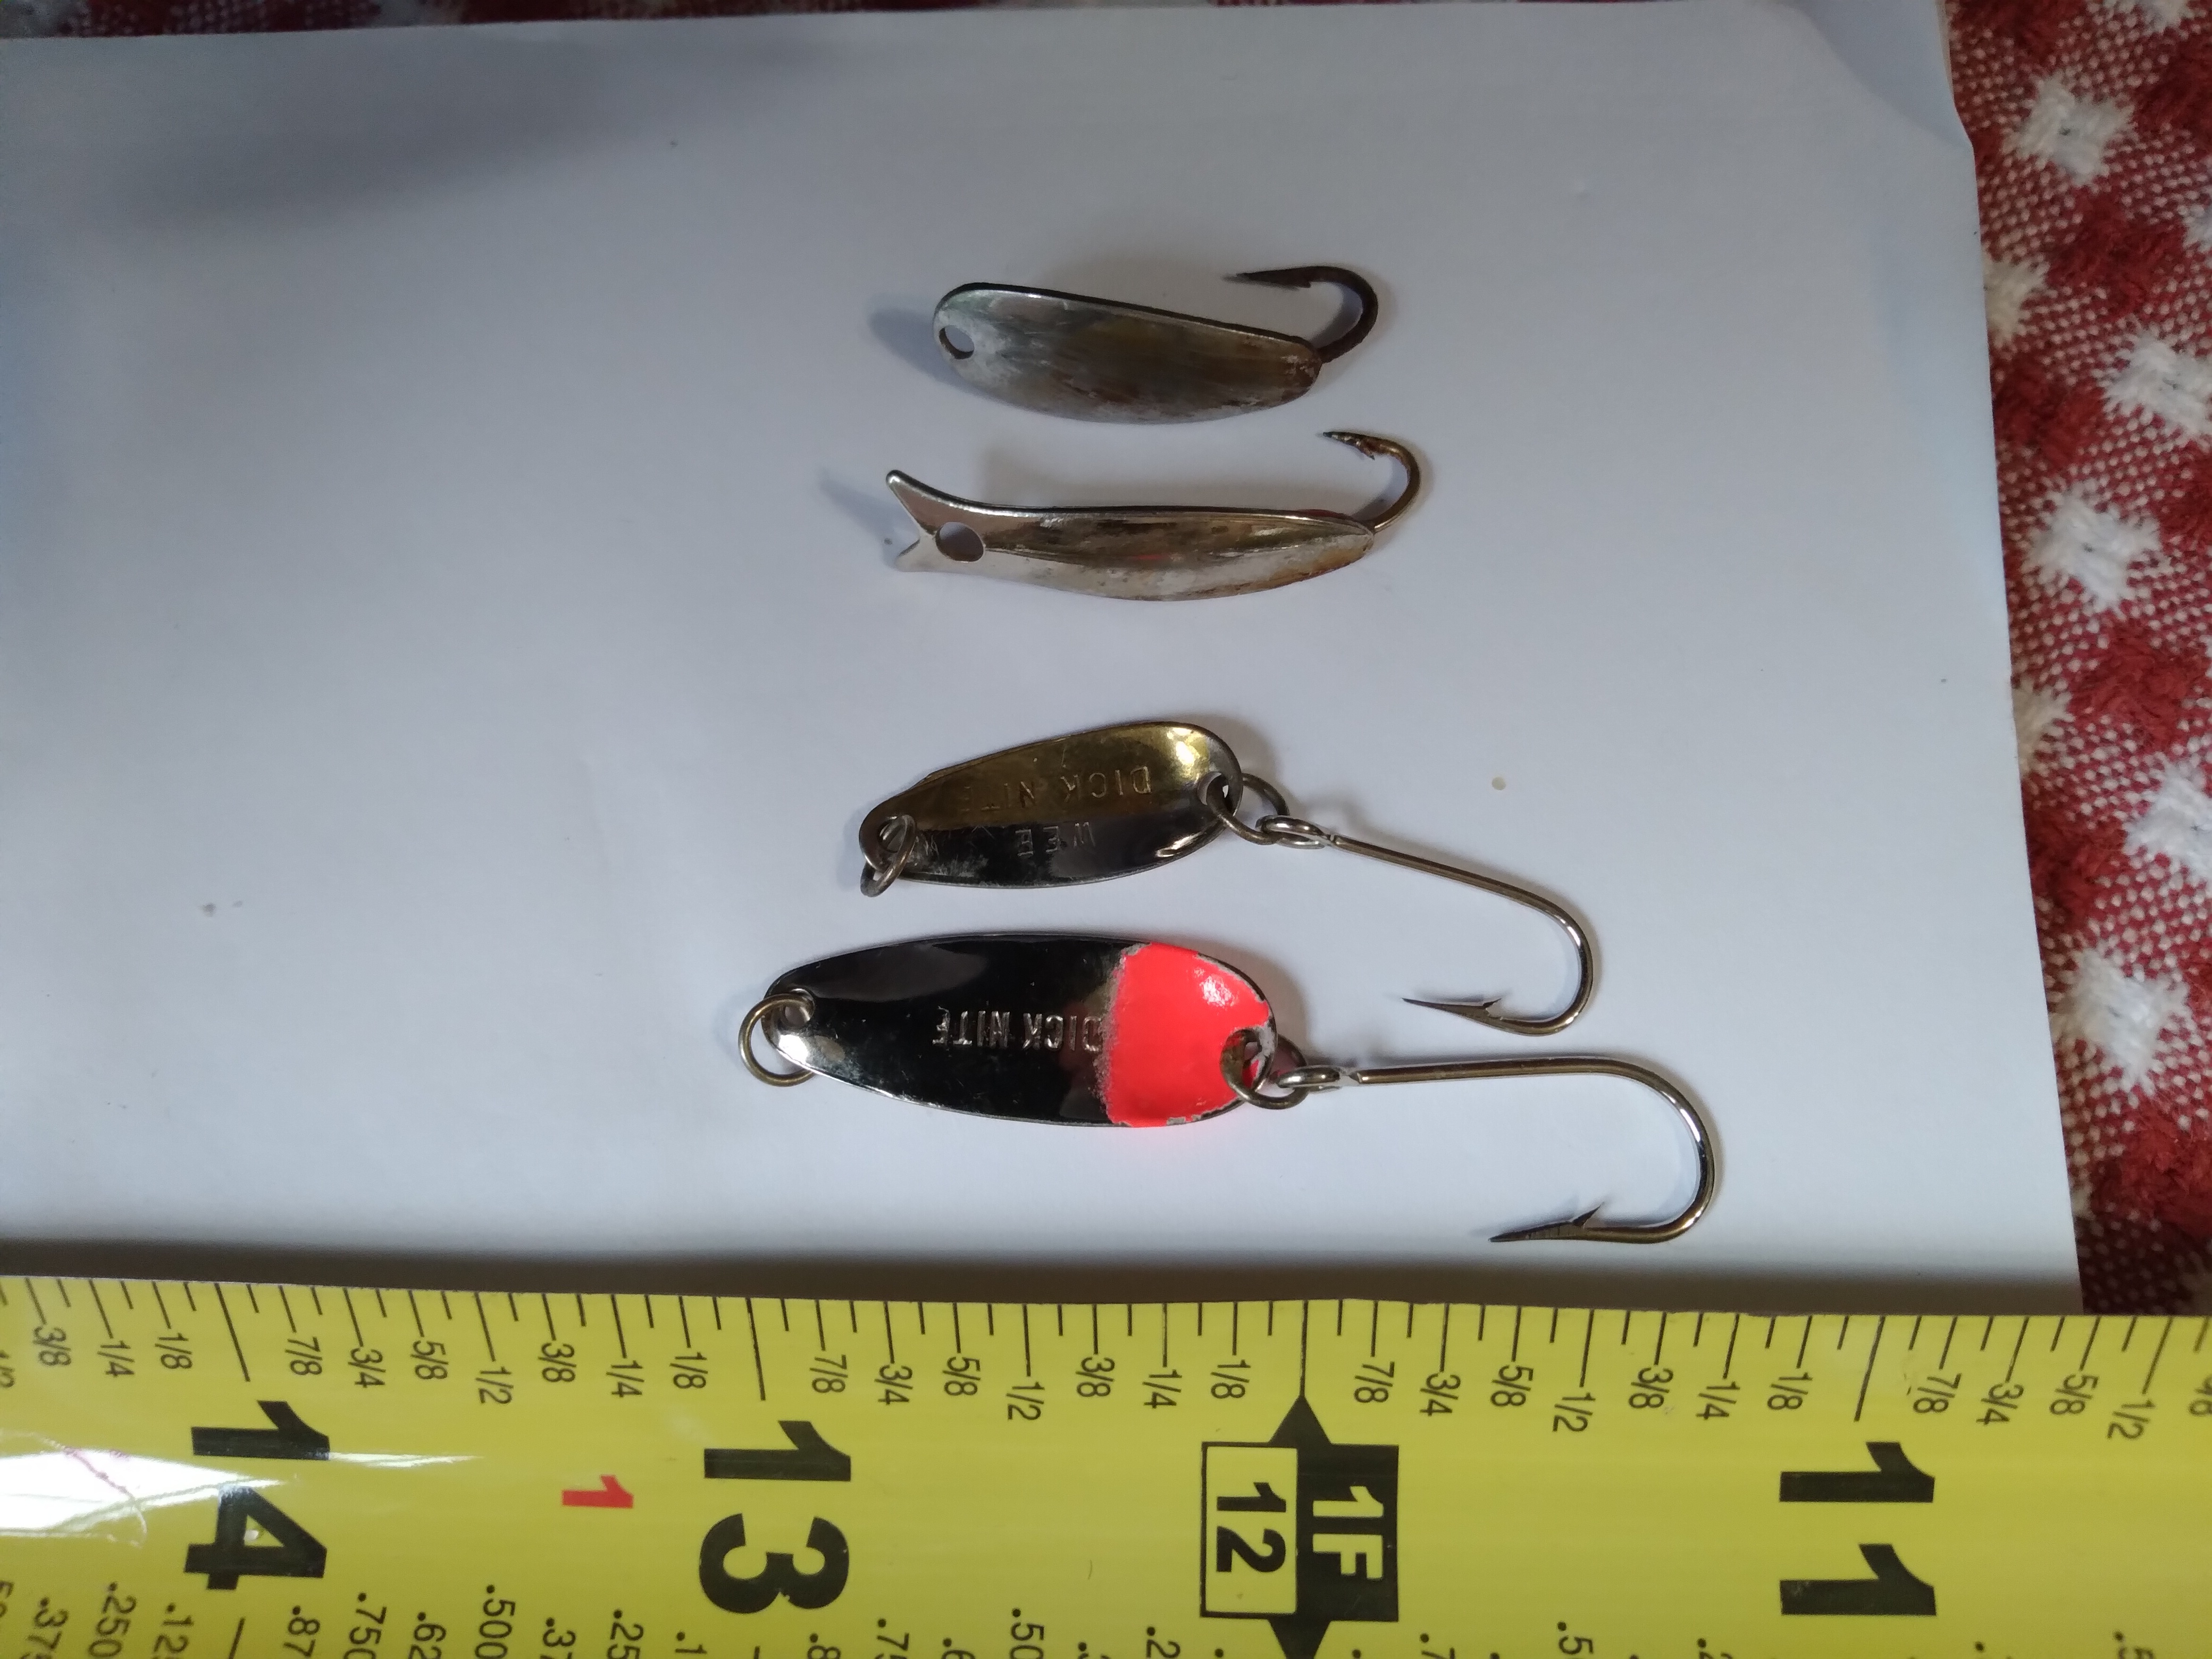 Spoon fed gills, Fishing with Fiberglass Fly Rods